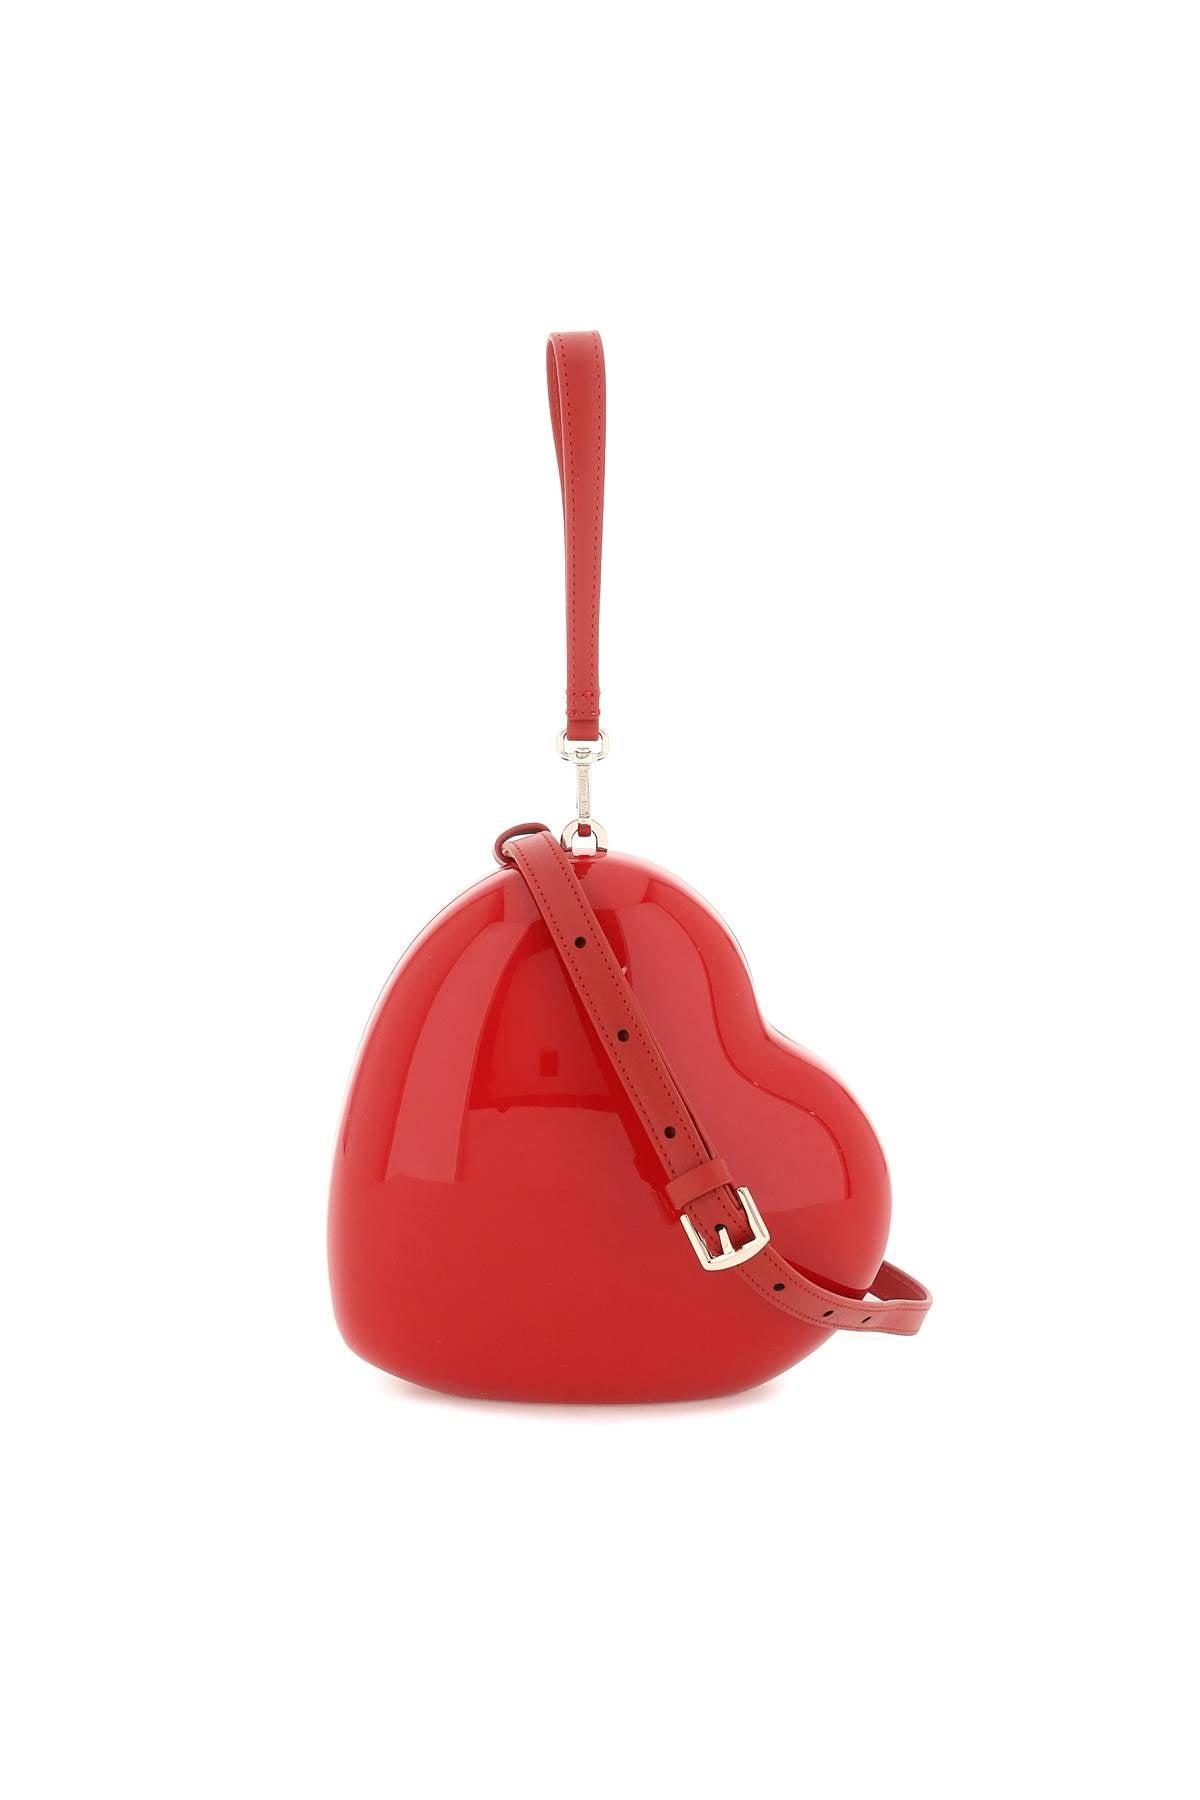 Simone Rocha Heart Bag With Leather Strap in Red | Lyst